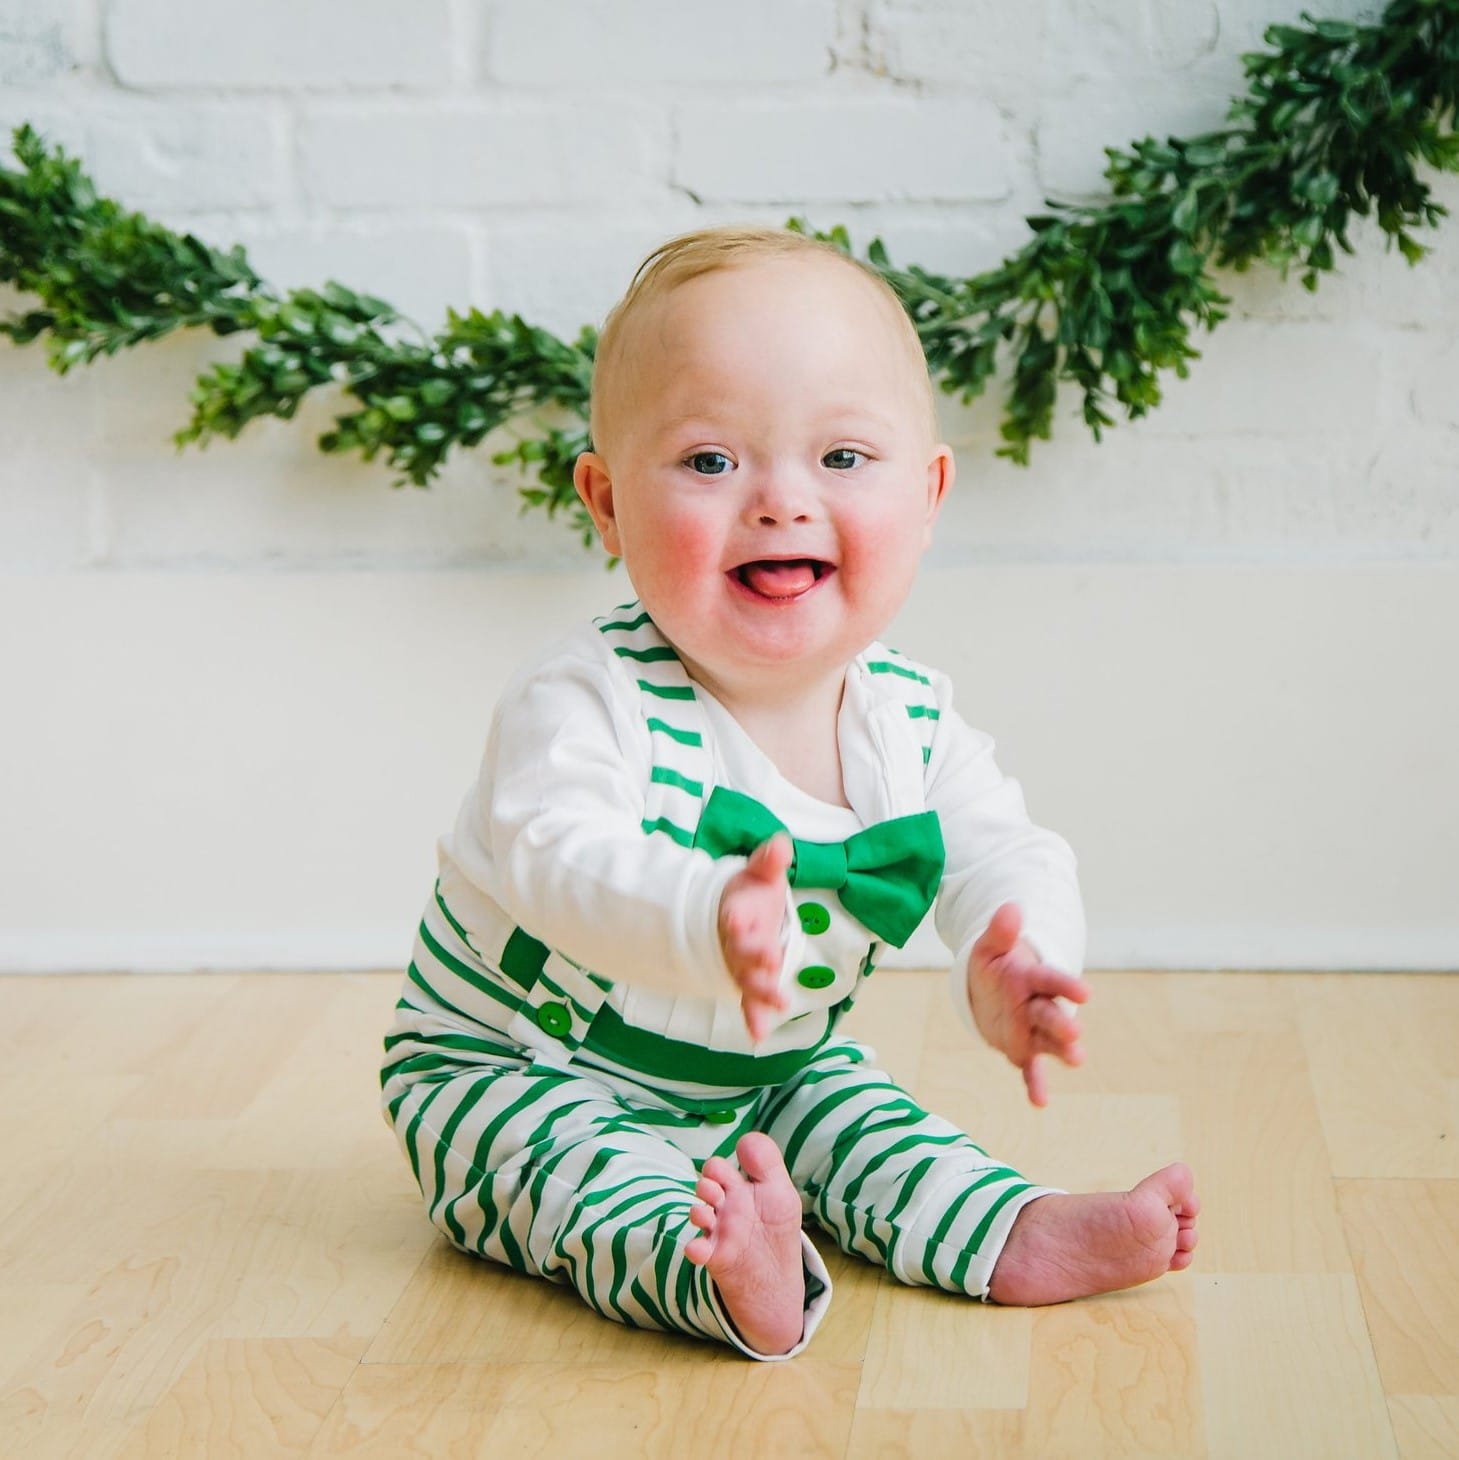 5-st-patrick-s-day-activities-for-kids-babies-toddlers